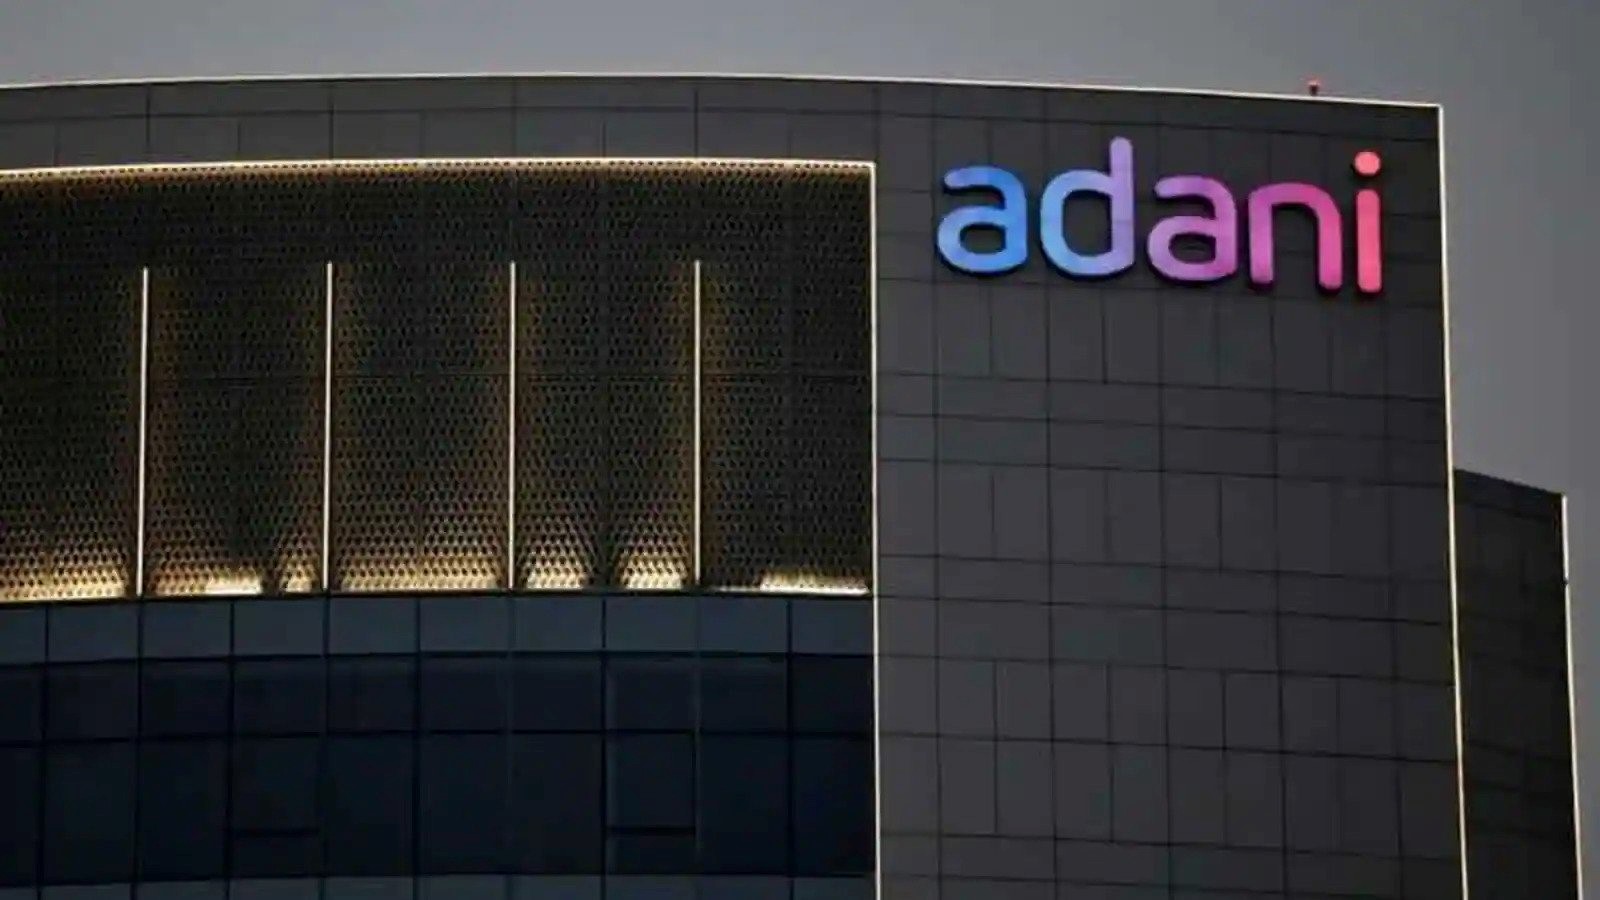 Adani Group to invest $5 billion in Odisha to set up an alumina refinery